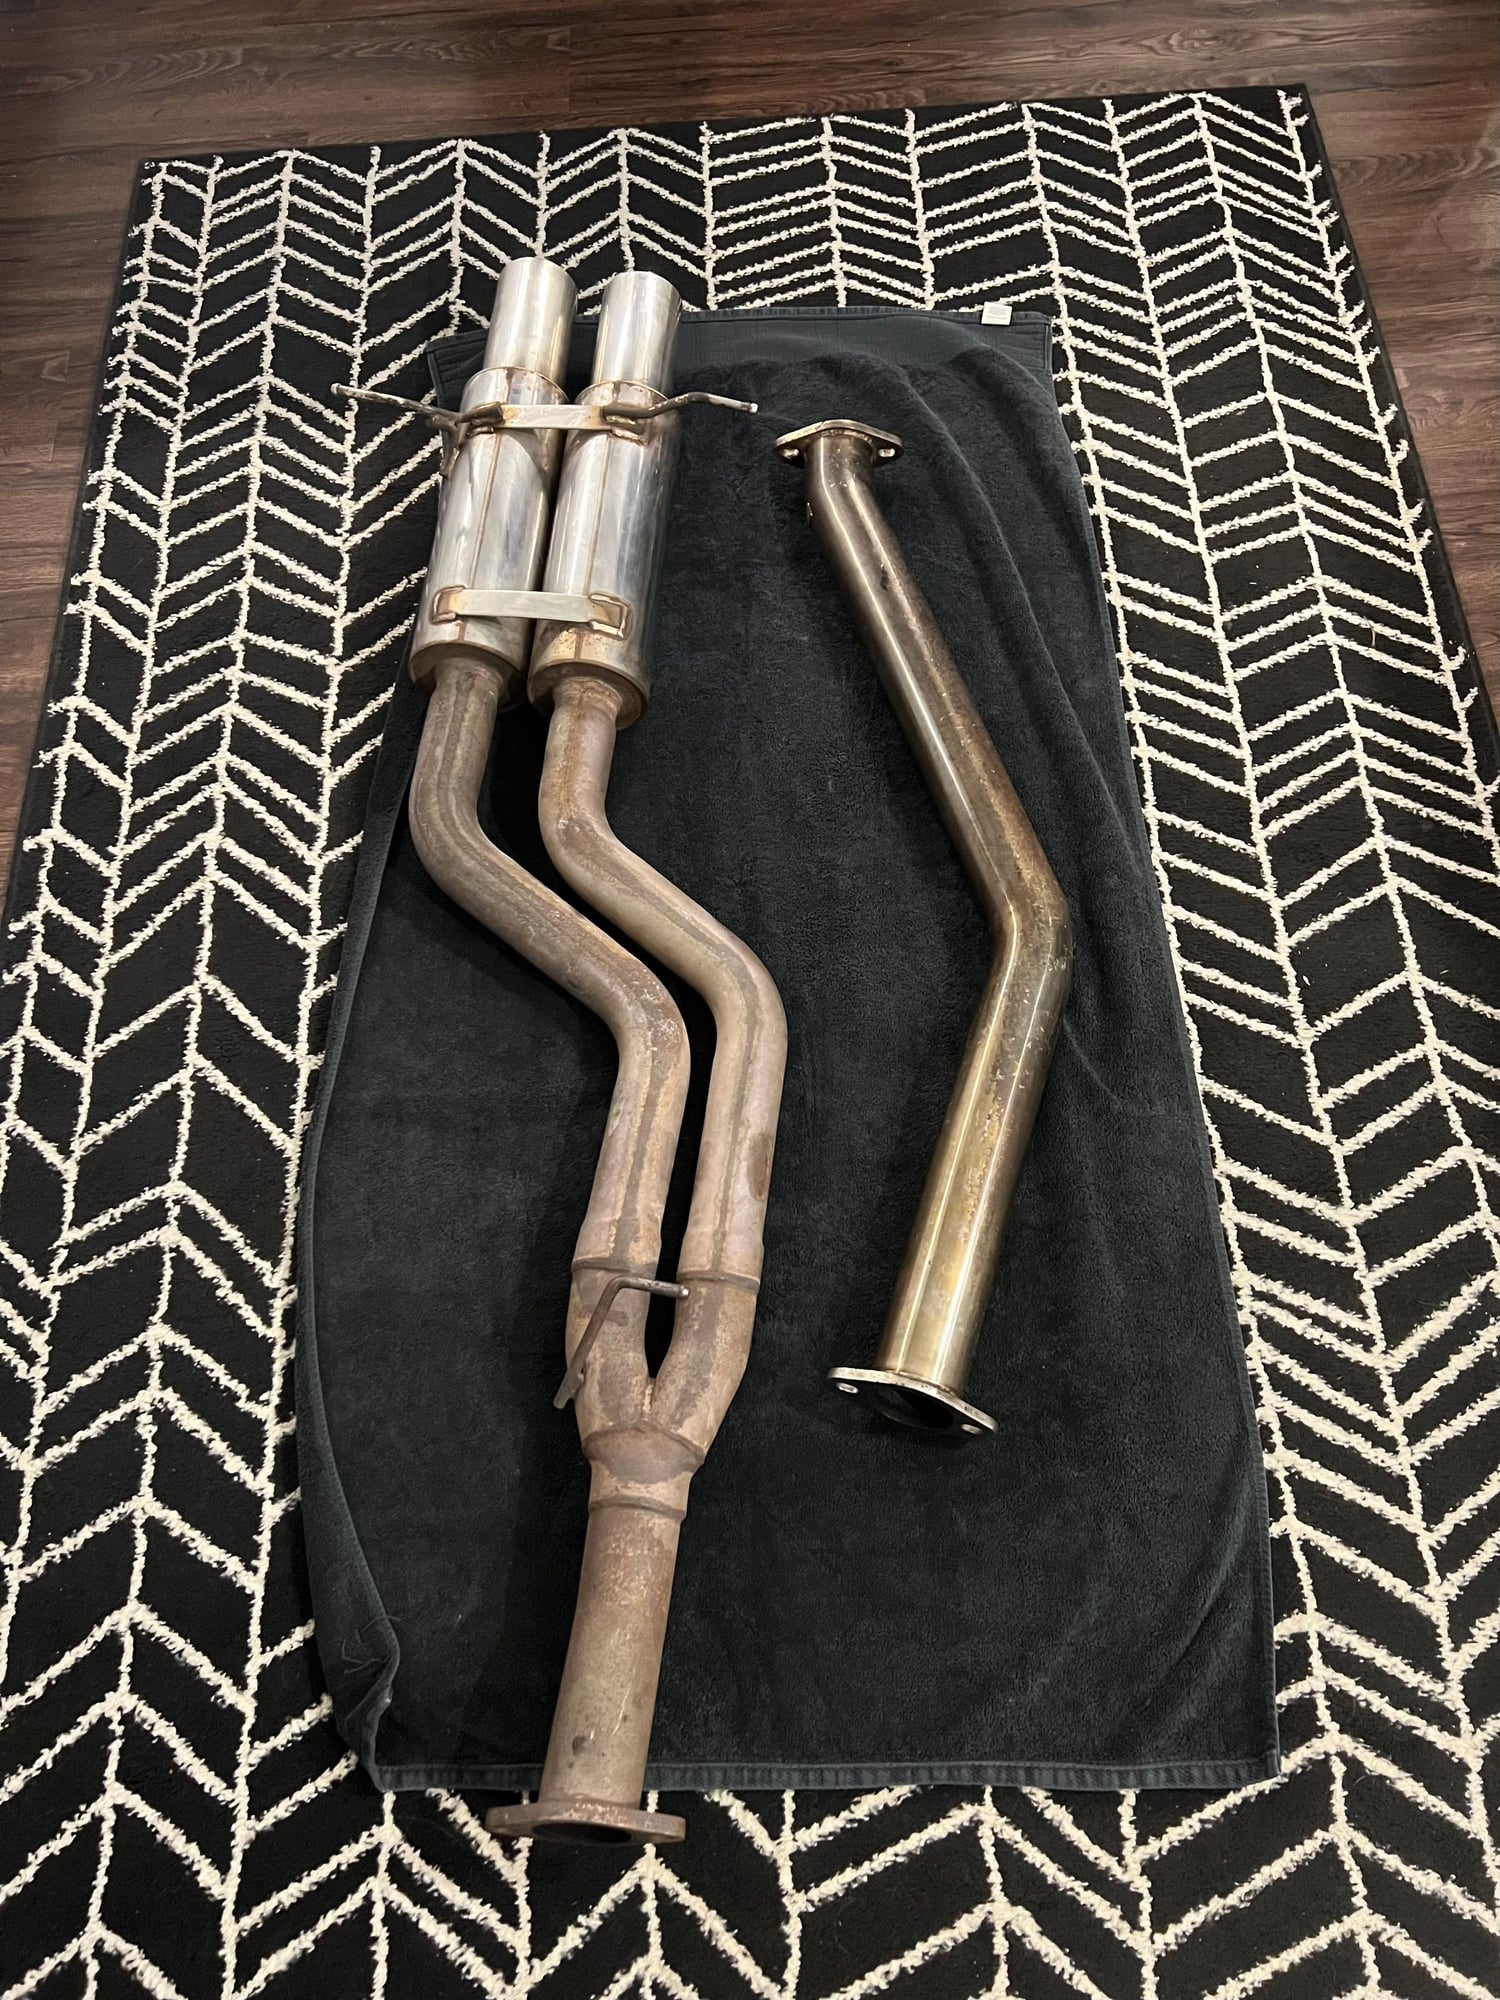 Engine - Exhaust - 93-95 Mazda RX-7 FD APEXI Cat Back Exhaust with Mid Pipe - Used - 1993 to 1995 Mazda RX-7 - Crofton, MD 21114, United States